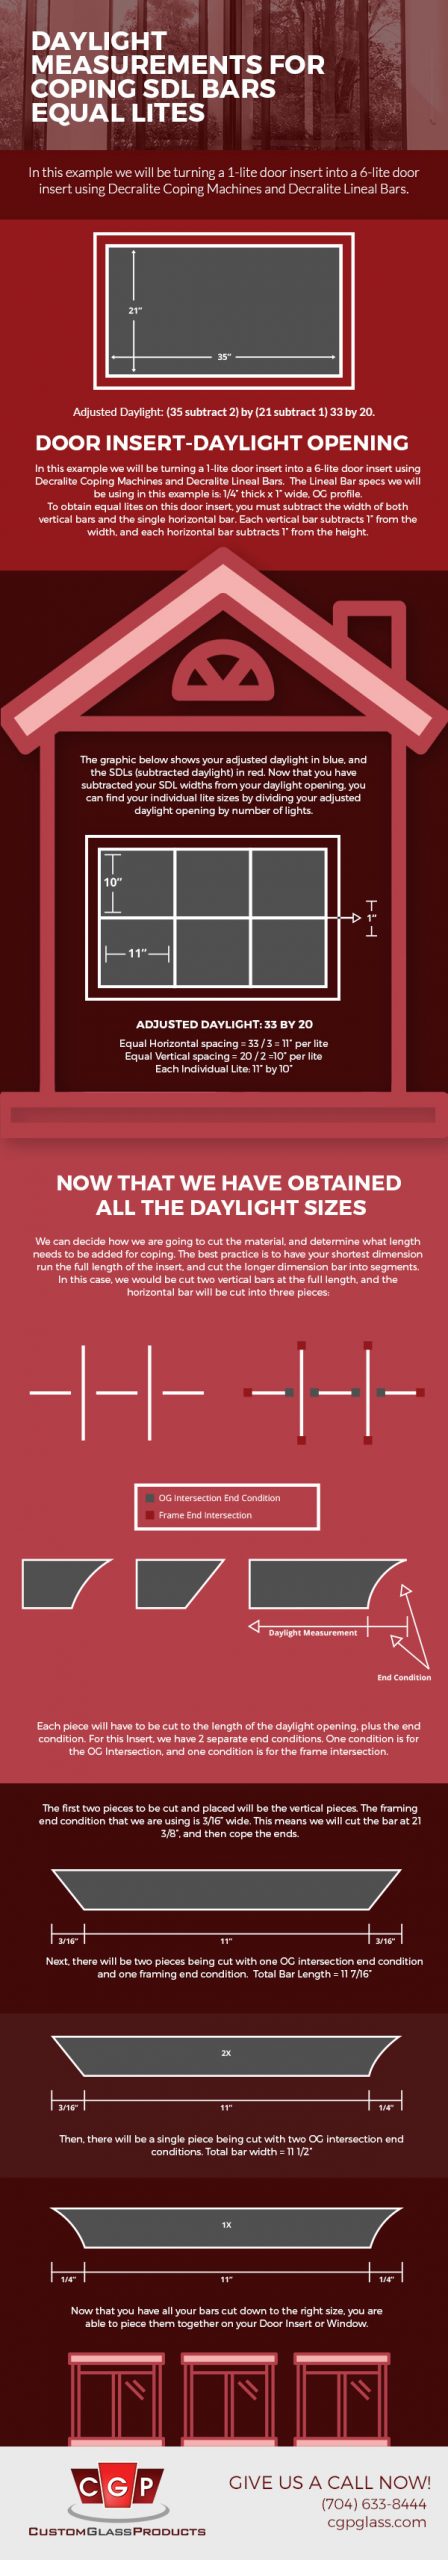 Daylight Measurements for Coping SDL bars Equal Lites [infographic]